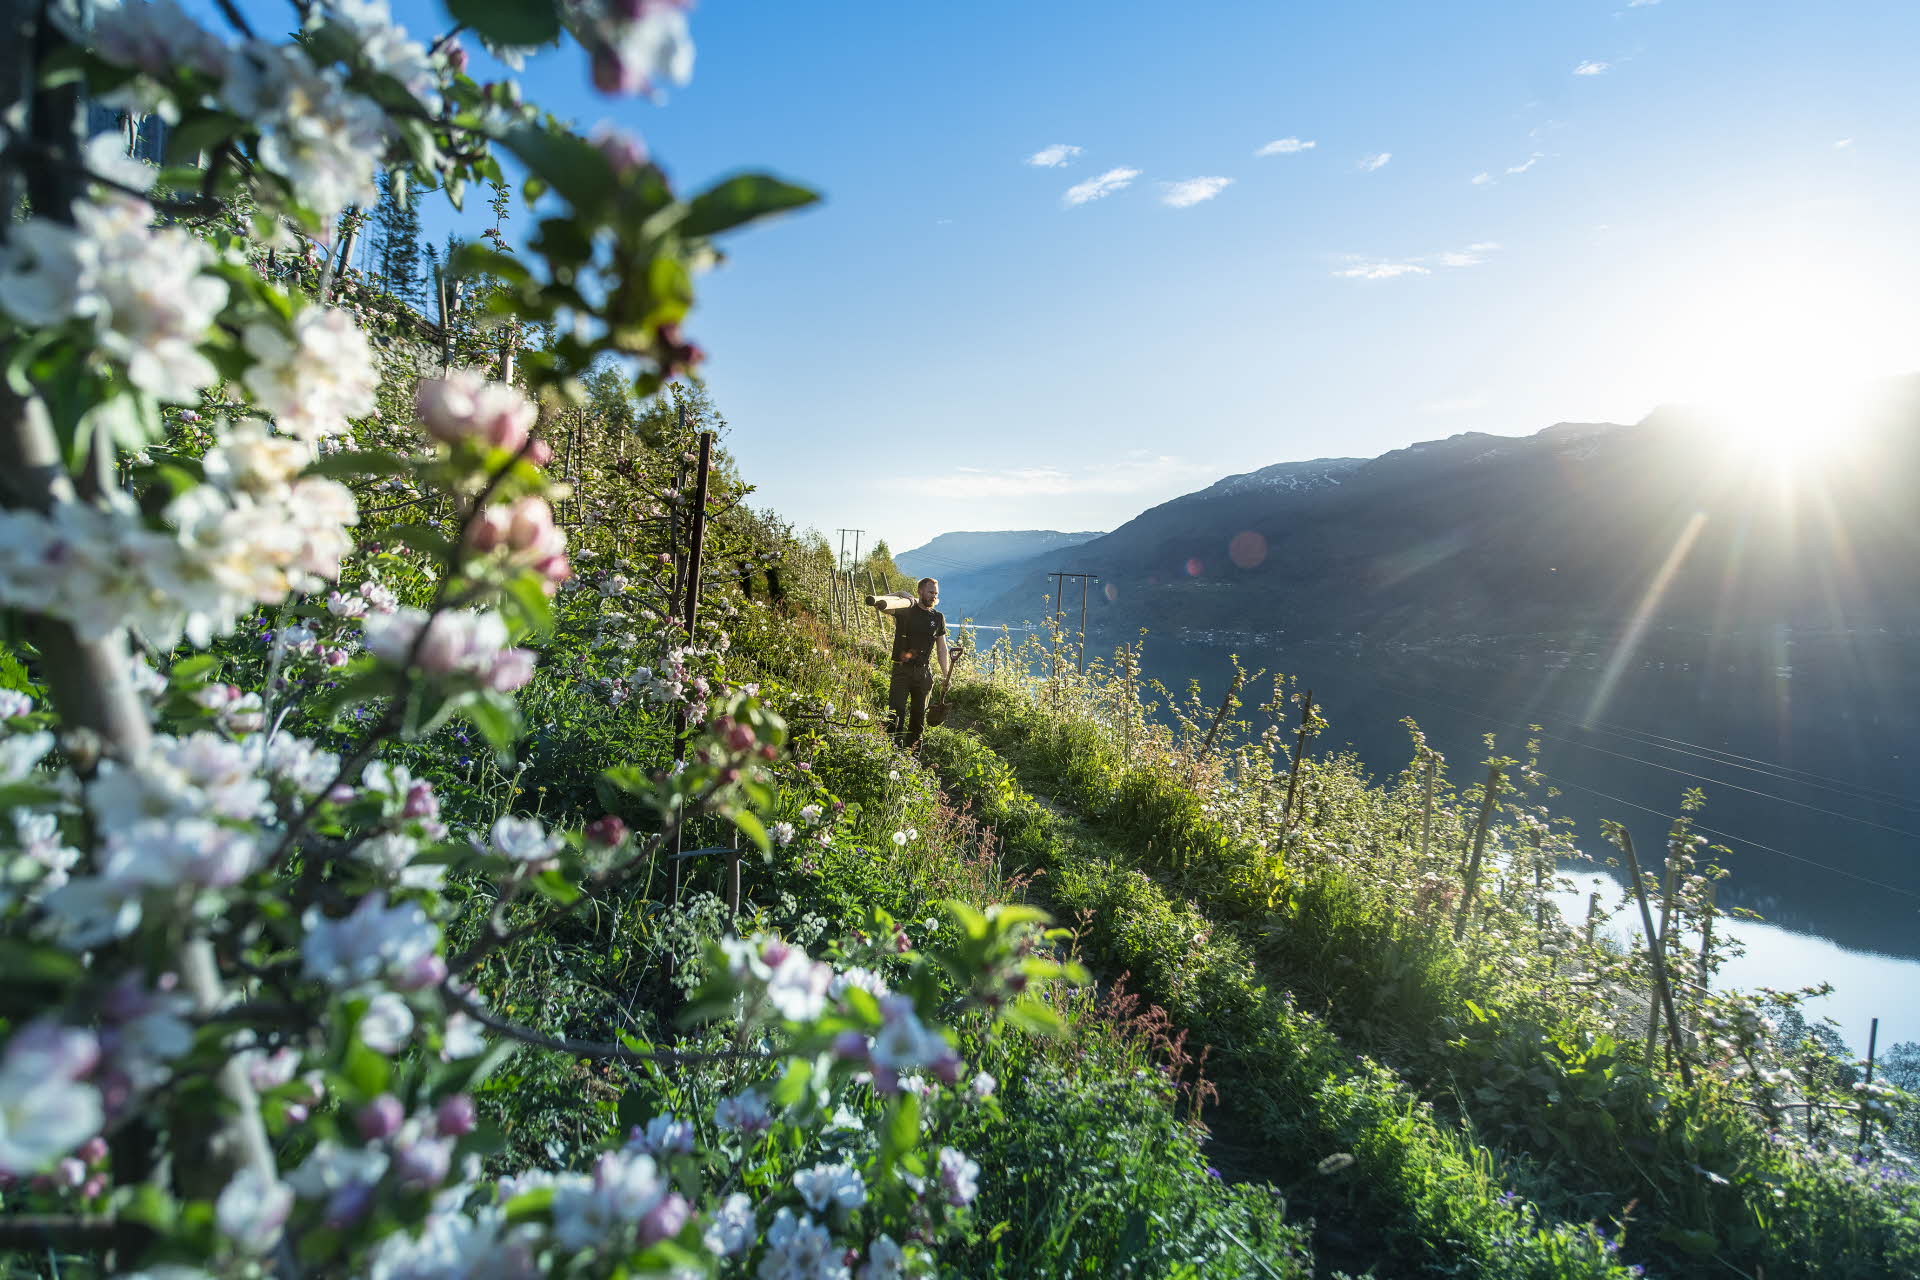 A man carrying a wooden stick on a path between blossoming fruit trees above the Hardangerfjord